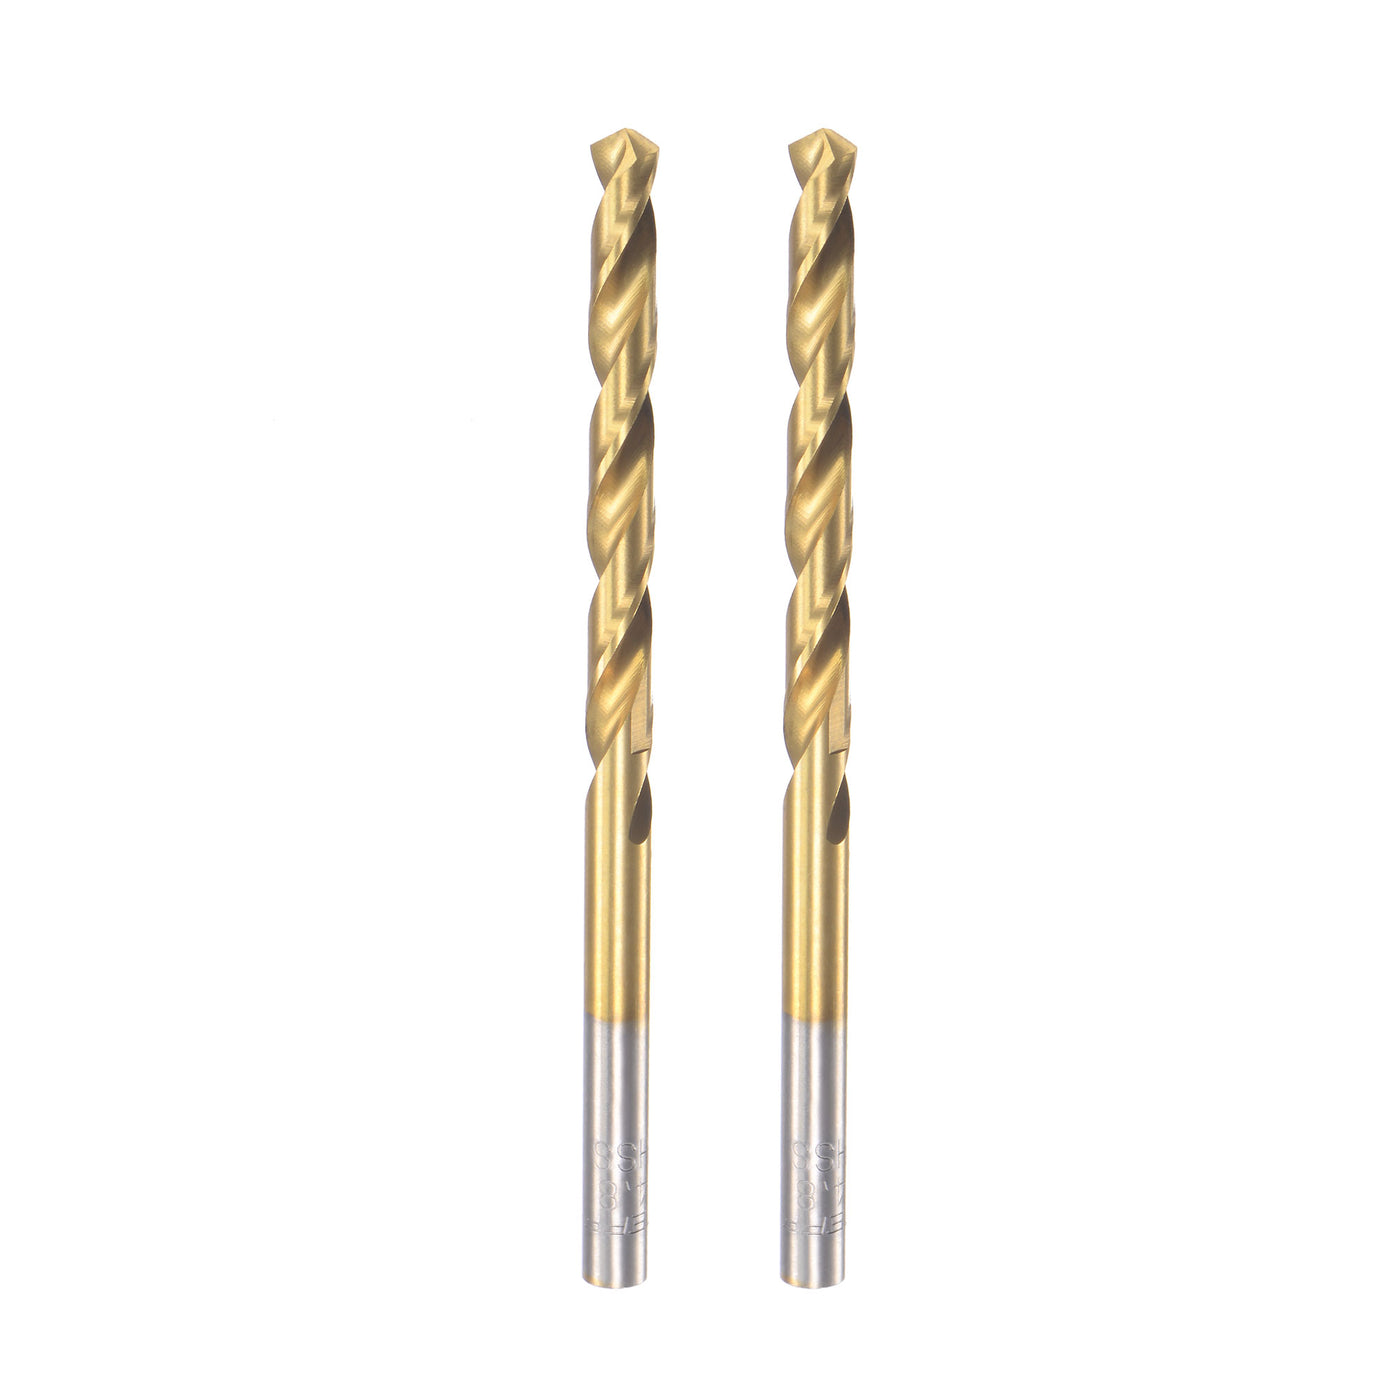 uxcell Uxcell High Speed Steel Twist Drill Bit 4.8mm Fully Ground Titanium Coated 2 Pcs